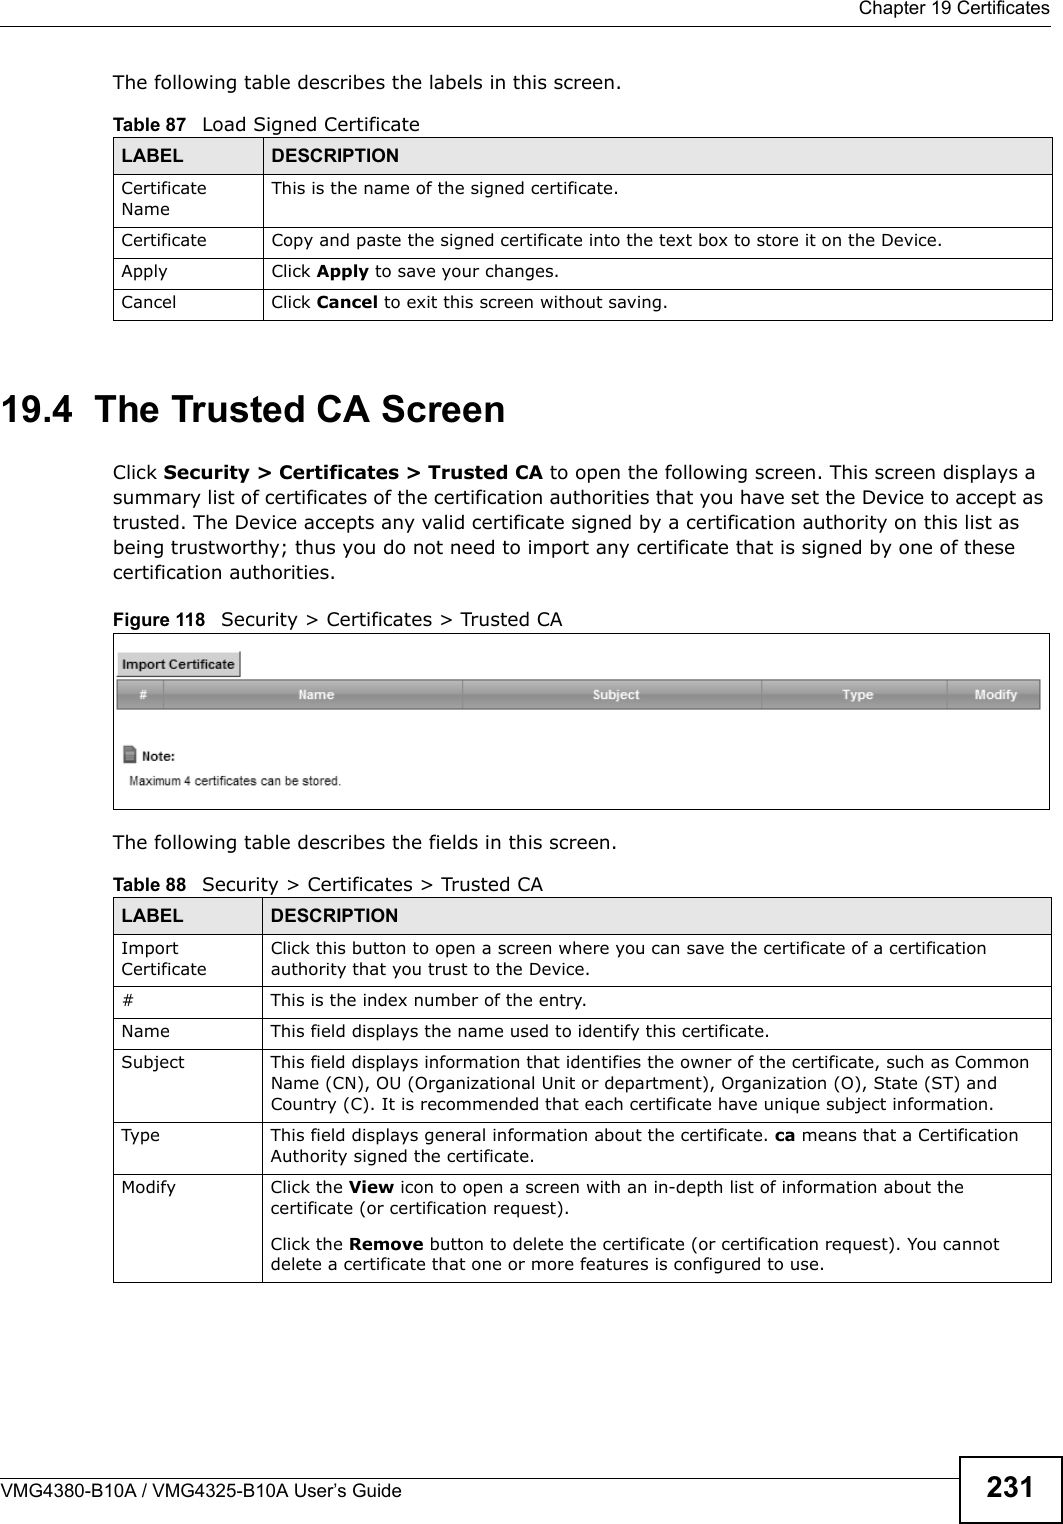  Chapter 19 CertificatesVMG4380-B10A / VMG4325-B10A User’s Guide 231The following table describes the labels in this screen. 19.4  The Trusted CA ScreenClick Security &gt; Certificates &gt; Trusted CA to open the following screen. This screen displays a summary list of certificates of the certification authorities that you have set the Device to accept as trusted. The Device accepts any valid certificate signed by a certification authority on this list as being trustworthy; thus you do not need to import any certificate that is signed by one of these certification authorities. Figure 118  Security &gt; Certificates &gt; Trusted CAThe following table describes the fields in this screen. Table 87   Load Signed CertificateLABEL DESCRIPTIONCertificate NameThis is the name of the signed certificate.Certificate Copy and paste the signed certificate into the text box to store it on the Device.Apply Click Apply to save your changes.Cancel Click Cancel to exit this screen without saving.Table 88   Security &gt; Certificates &gt; Trusted CALABEL DESCRIPTIONImportCertificateClick this button to open a screen where you can save the certificate of a certification authority that you trust to the Device.# This is the index number of the entry.Name This field displays the name used to identify this certificate.Subject This field displays information that identifies the owner of the certificate, such as Common Name (CN), OU (Organizational Unit or department), Organization (O), State (ST) and Country (C). It is recommended that each certificate have unique subject information.Type This field displays general information about the certificate. ca means that a Certification Authority signed the certificate.Modify Click the View icon to open a screen with an in-depth list of information about the certificate (or certification request).Click the Remove button to delete the certificate (or certification request). You cannotdelete a certificate that one or more features is configured to use.